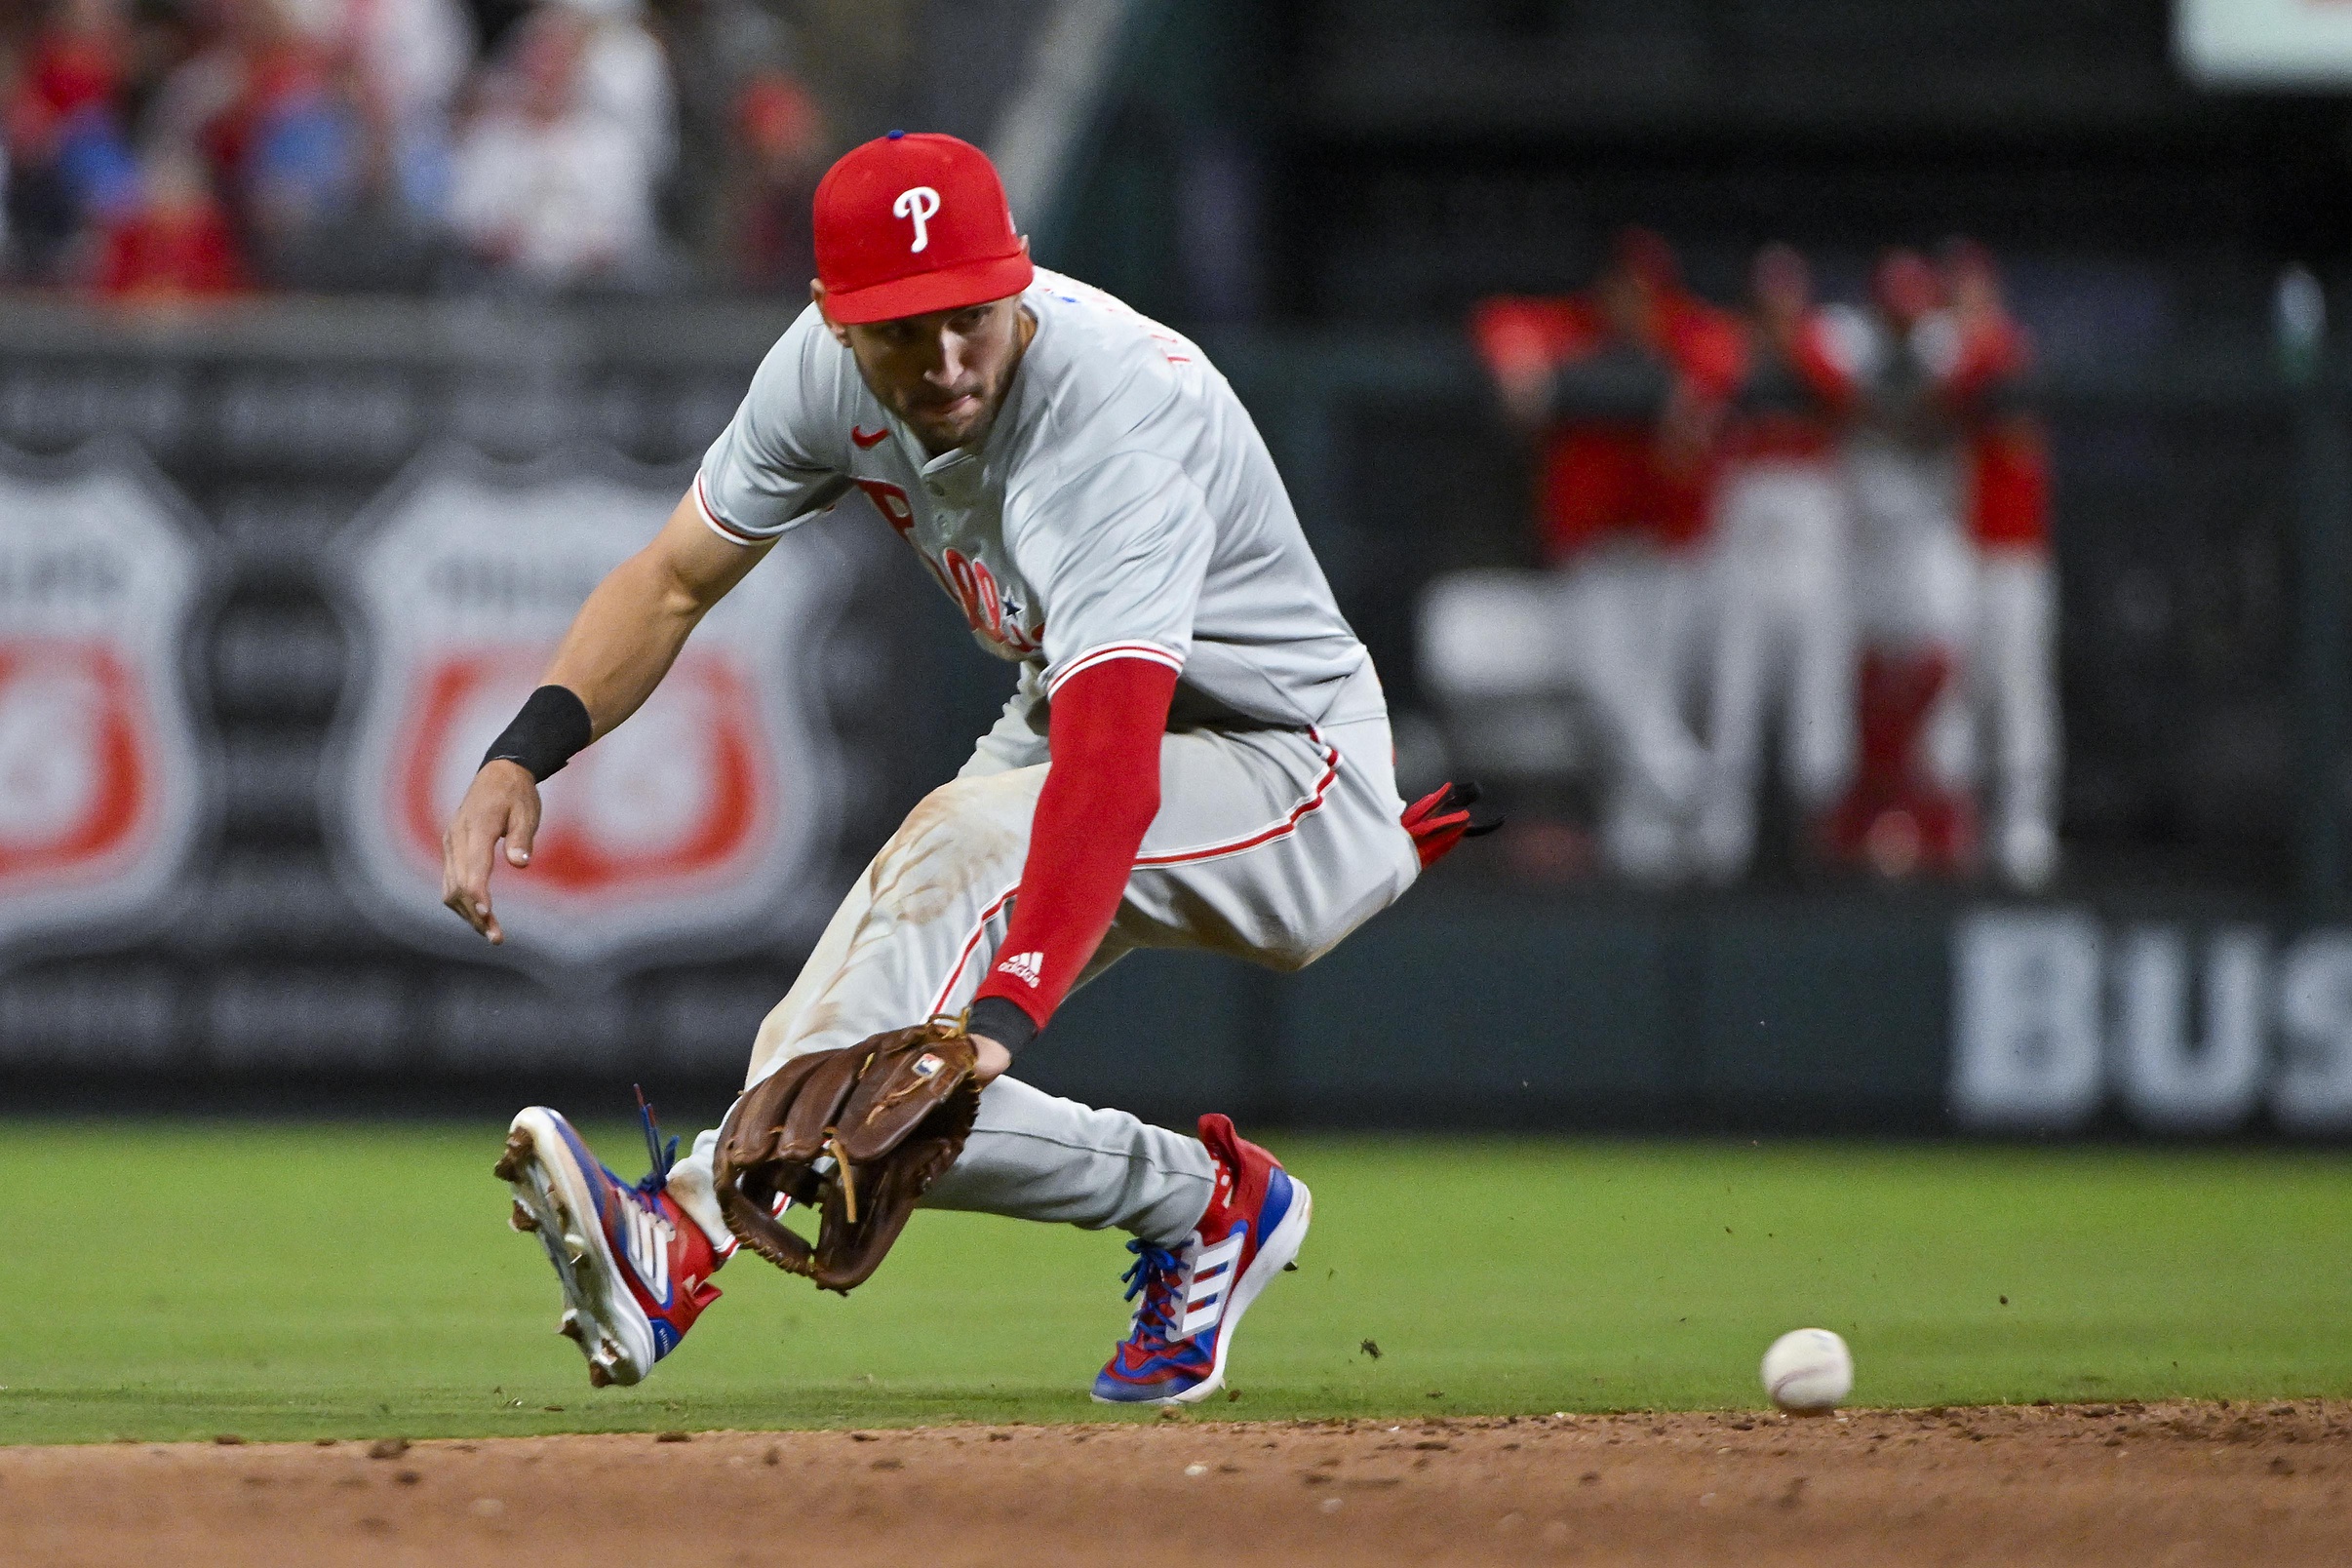 Phillies Most Dynamic Player Goes Through Agility Drills